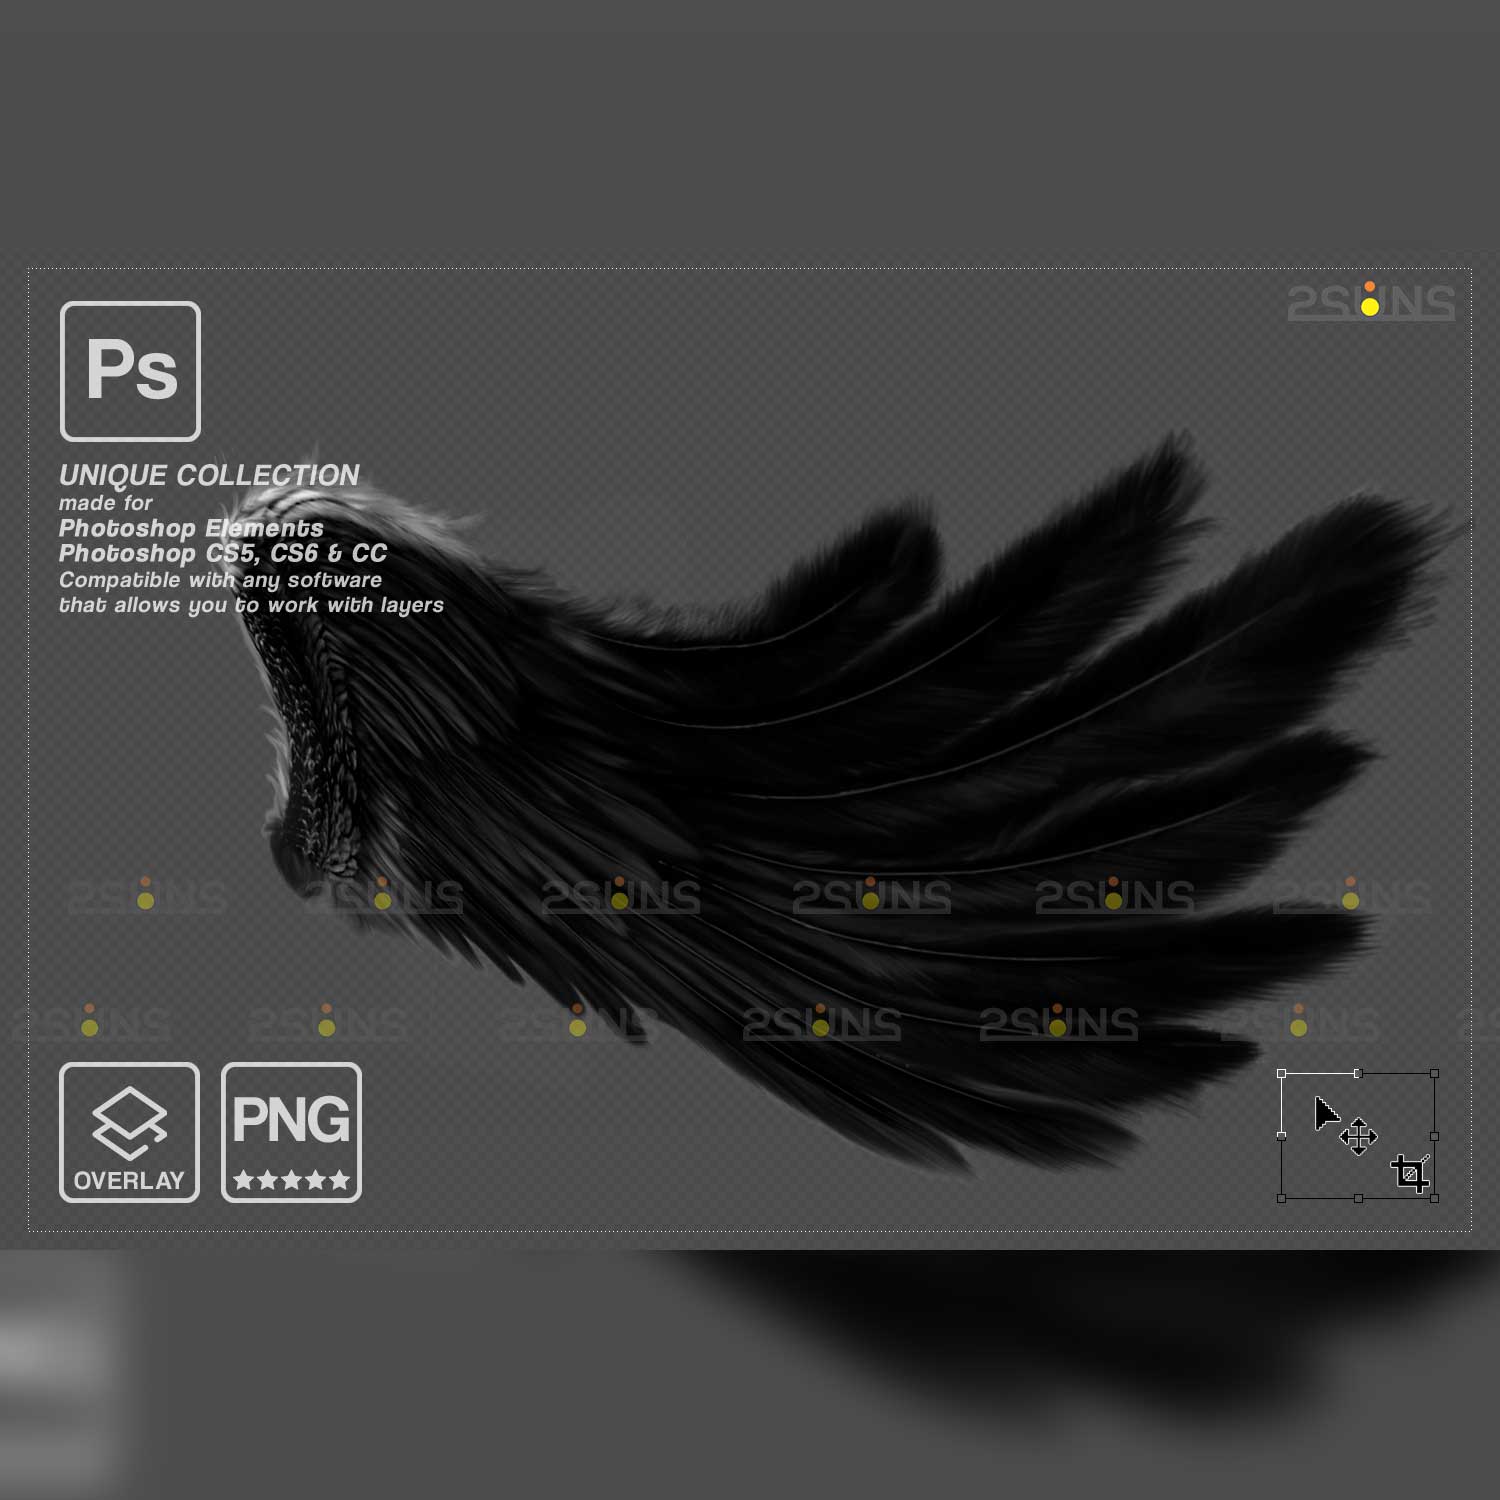 Realistic Black Angel Wings Photoshop Overlays Raven Wing.